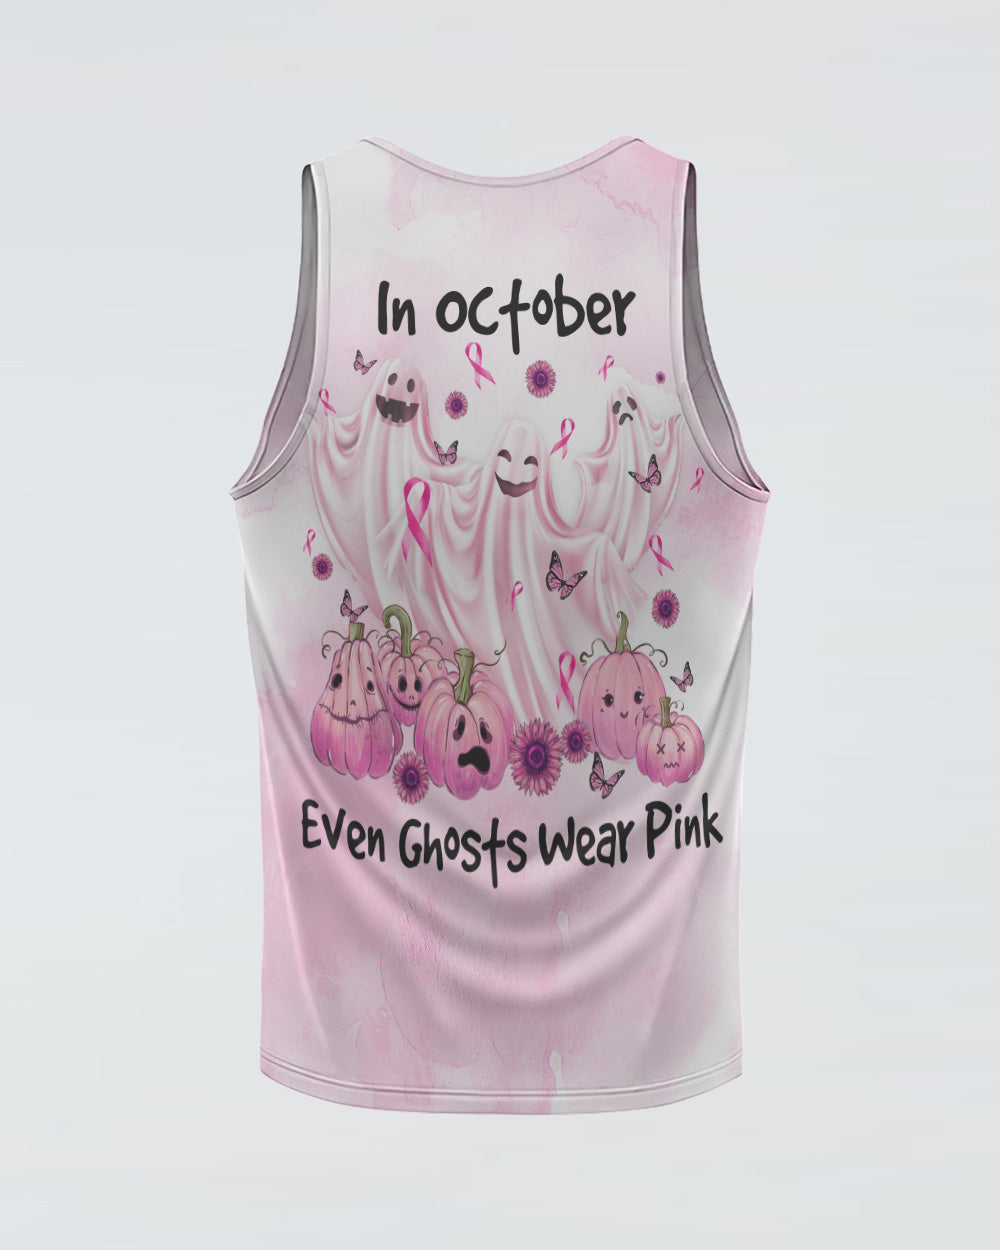 In October Even Ghosts Wear Pink Women's Breast Cancer Awareness Tanks